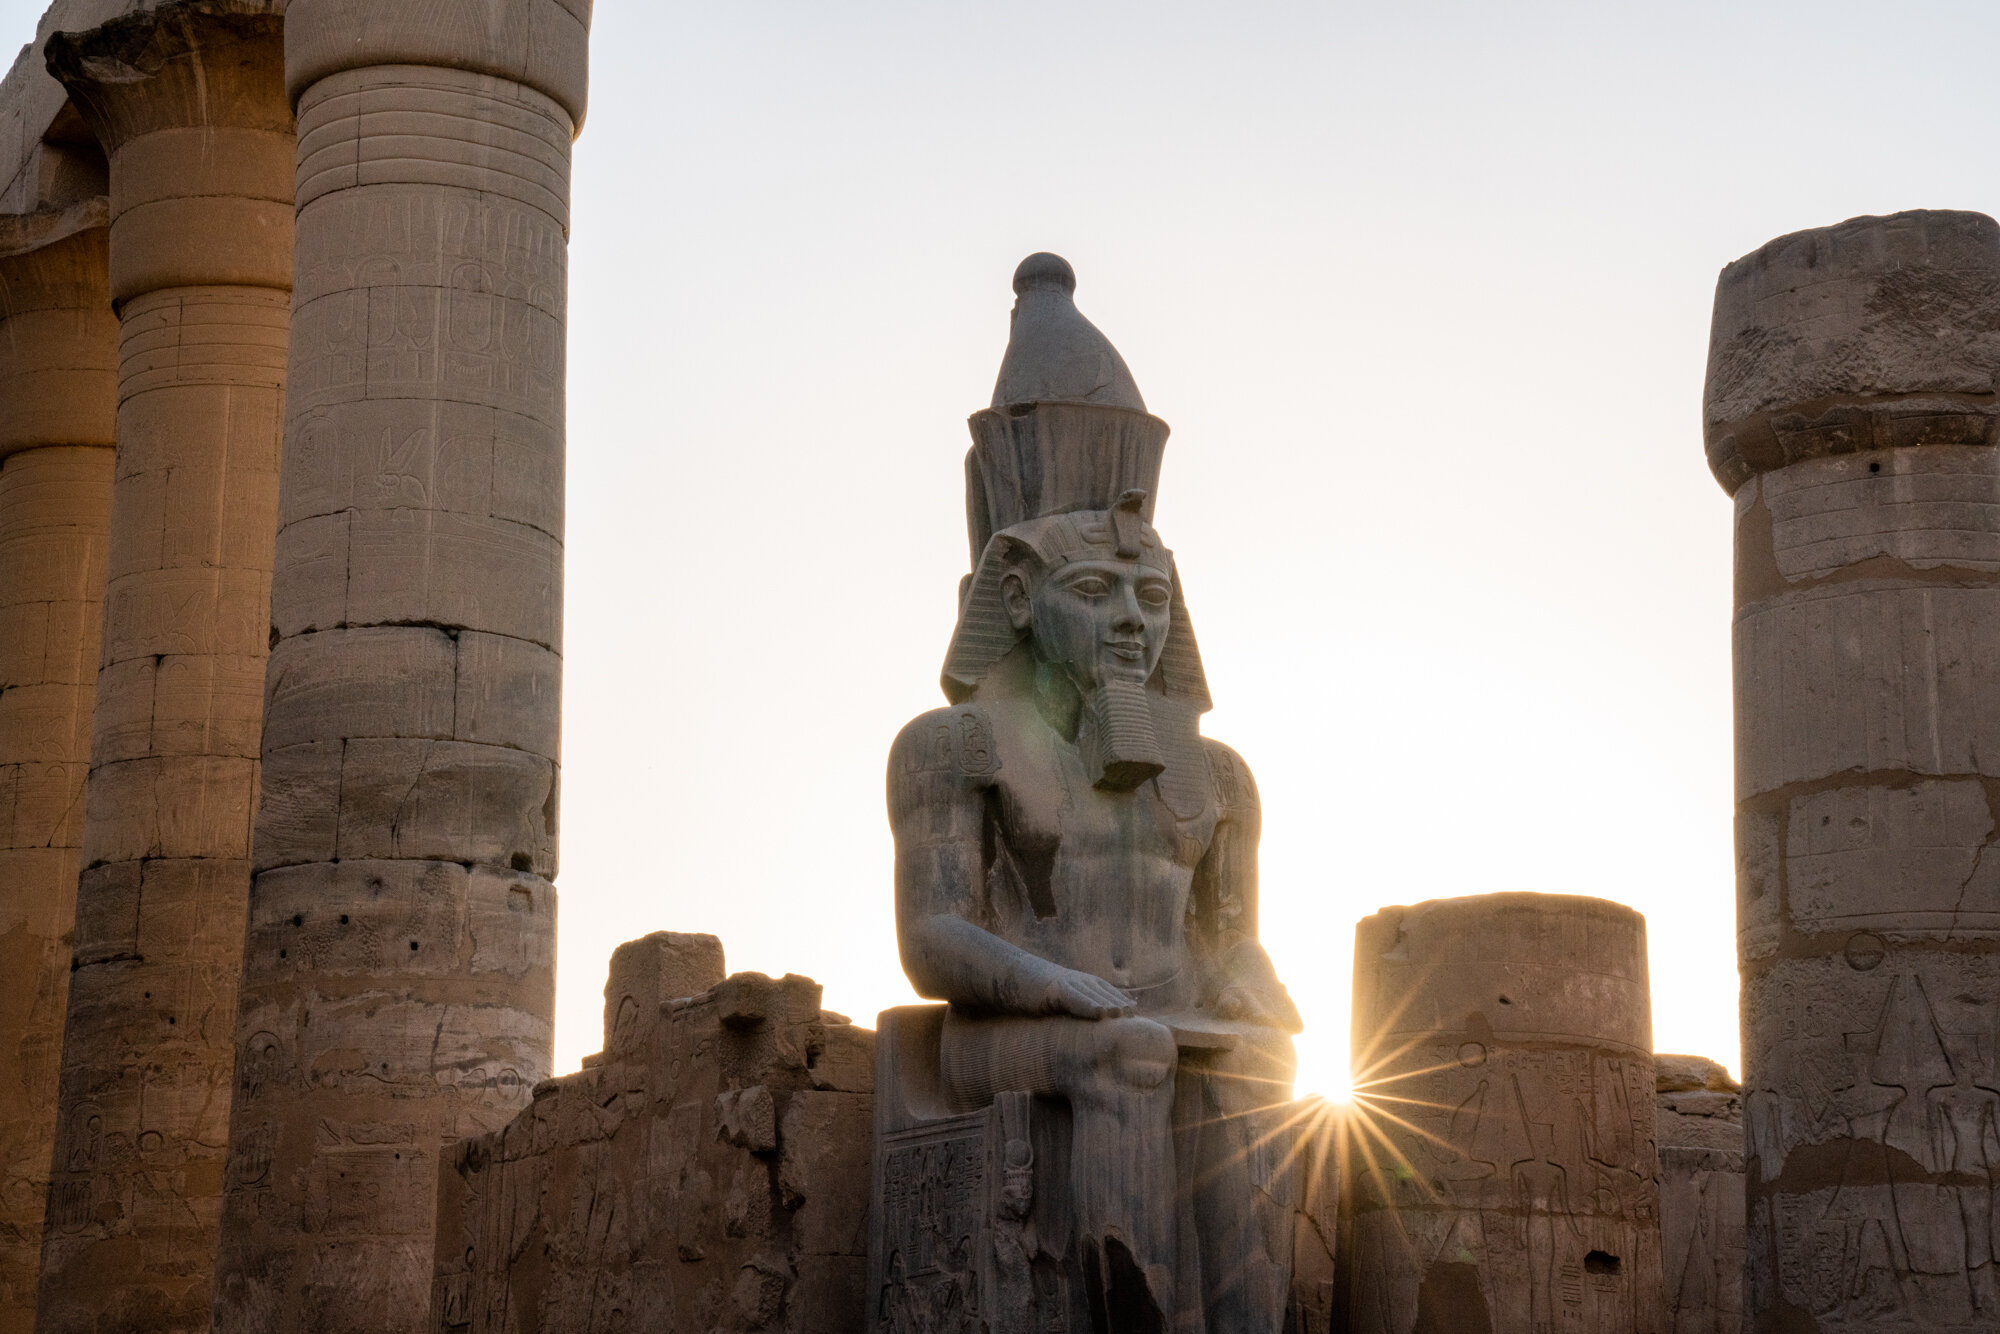 Eric Kruszewski photographs The Luxor Temple in Egypt for Lindblad Expeditions.